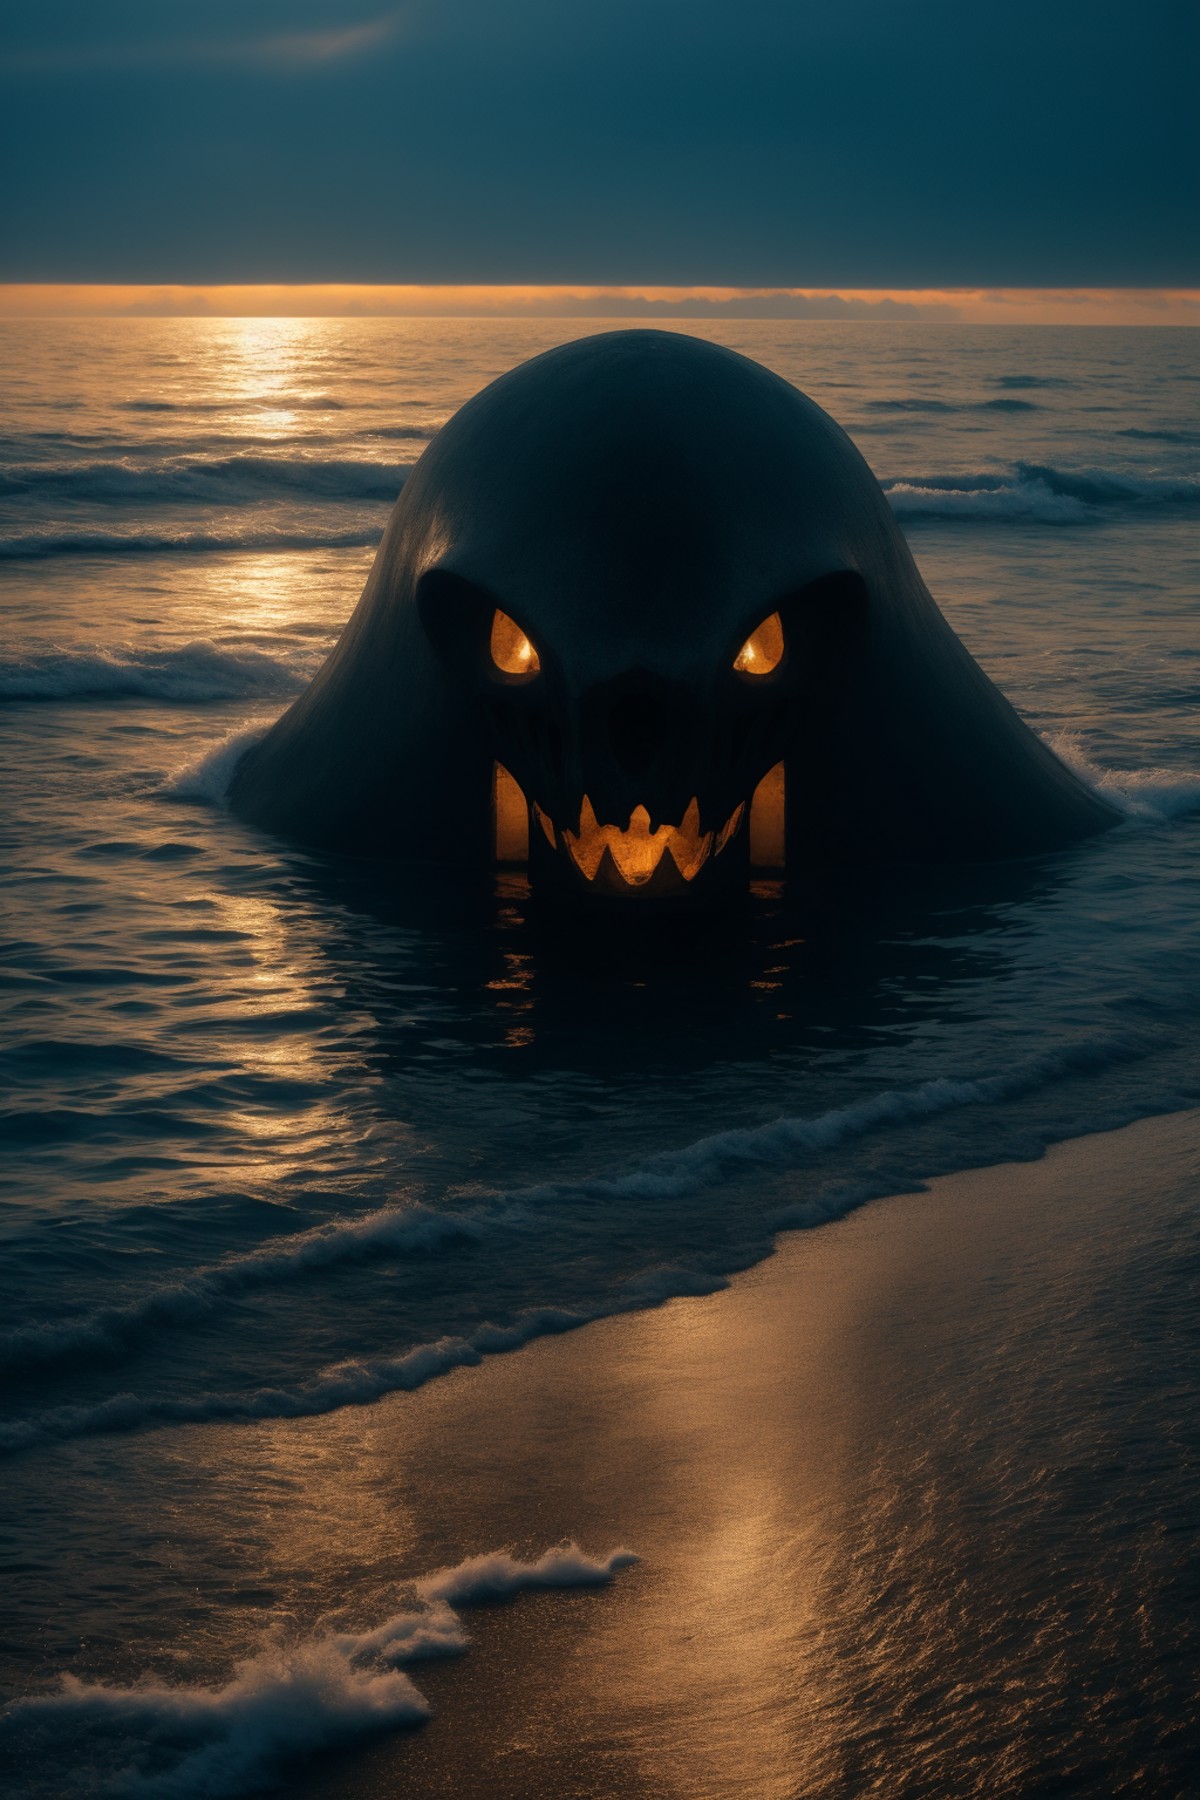 A large, skull-like creature with glowing eyes and mouth emerges from the ocean at sunset. The water gently laps at the shore, reflecting the last light of day while creating an atmosphere that is foreboding due to the presence of the skull-like creature. 